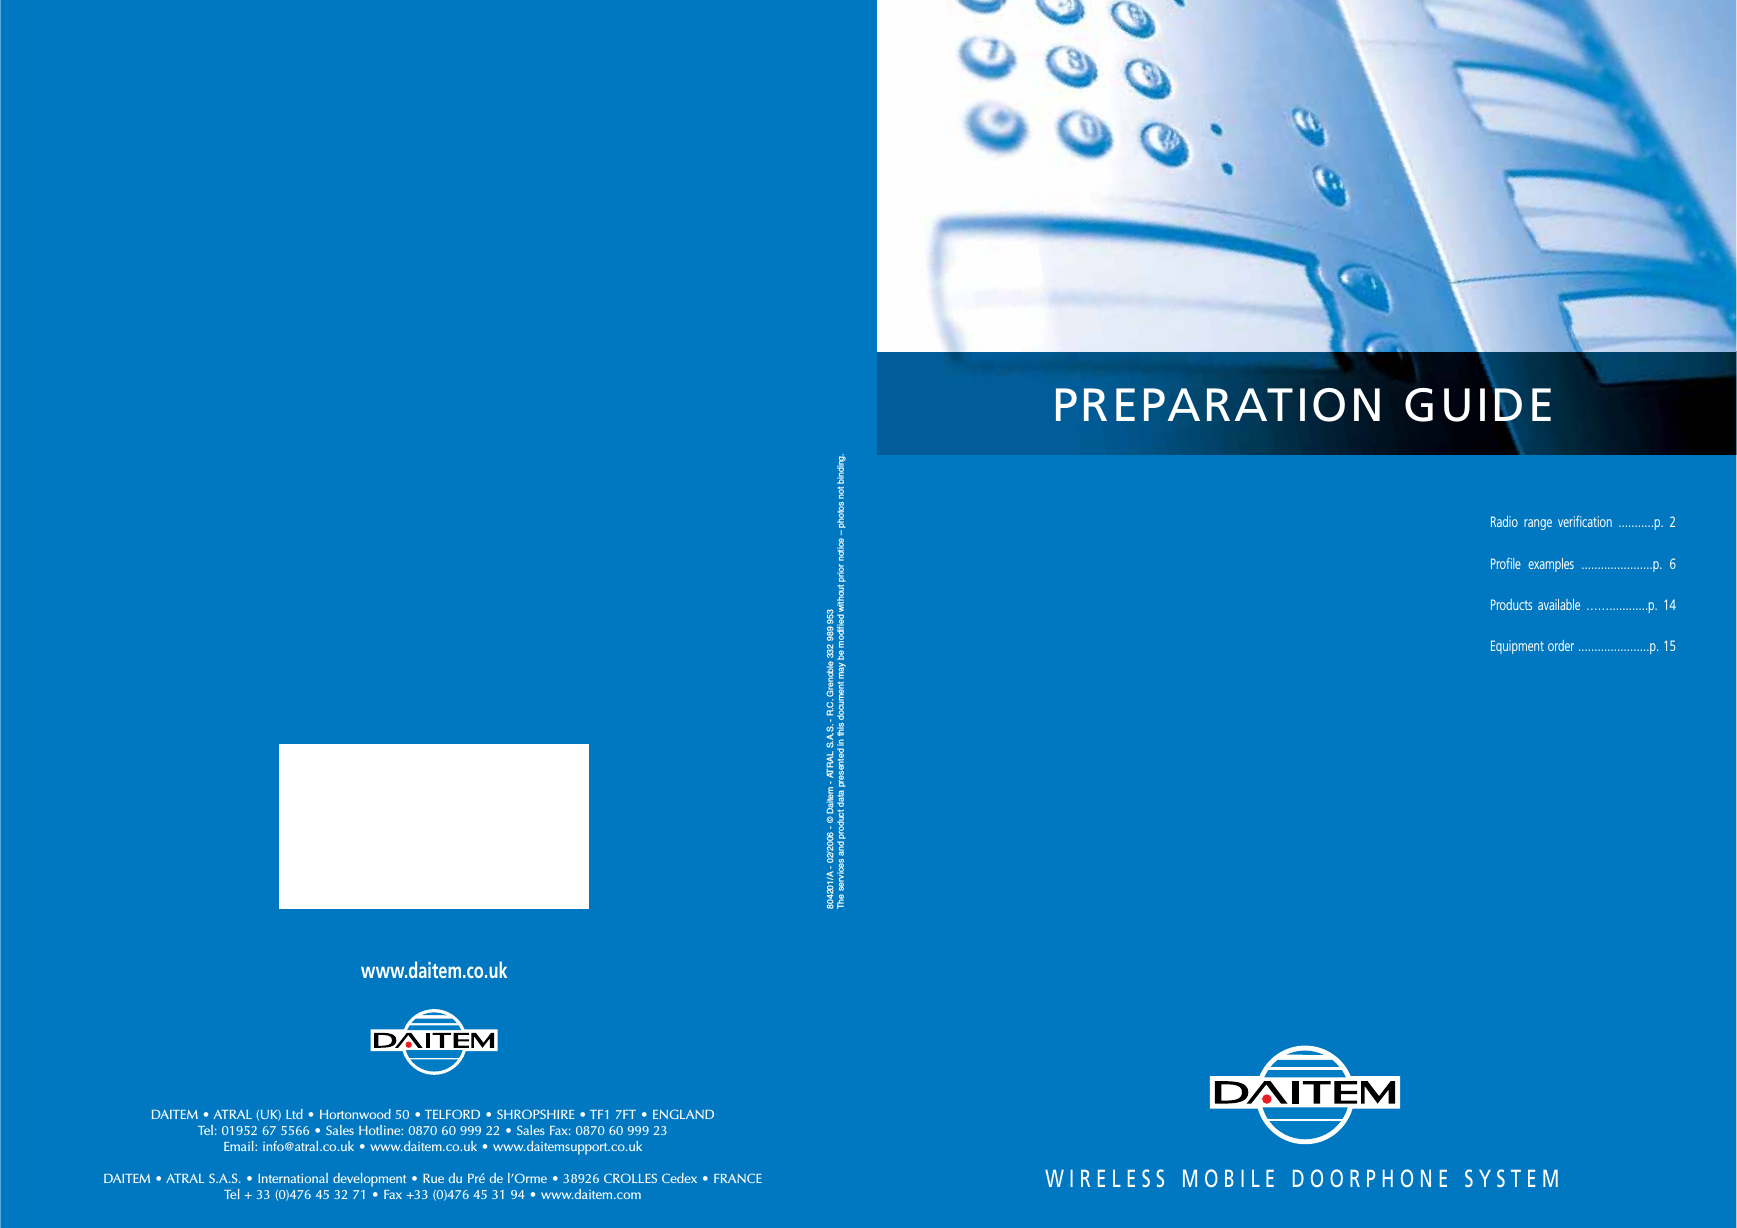 Page 1 of 8 - Doorphone Multiway Preparation Guide_804201 Guide 804201